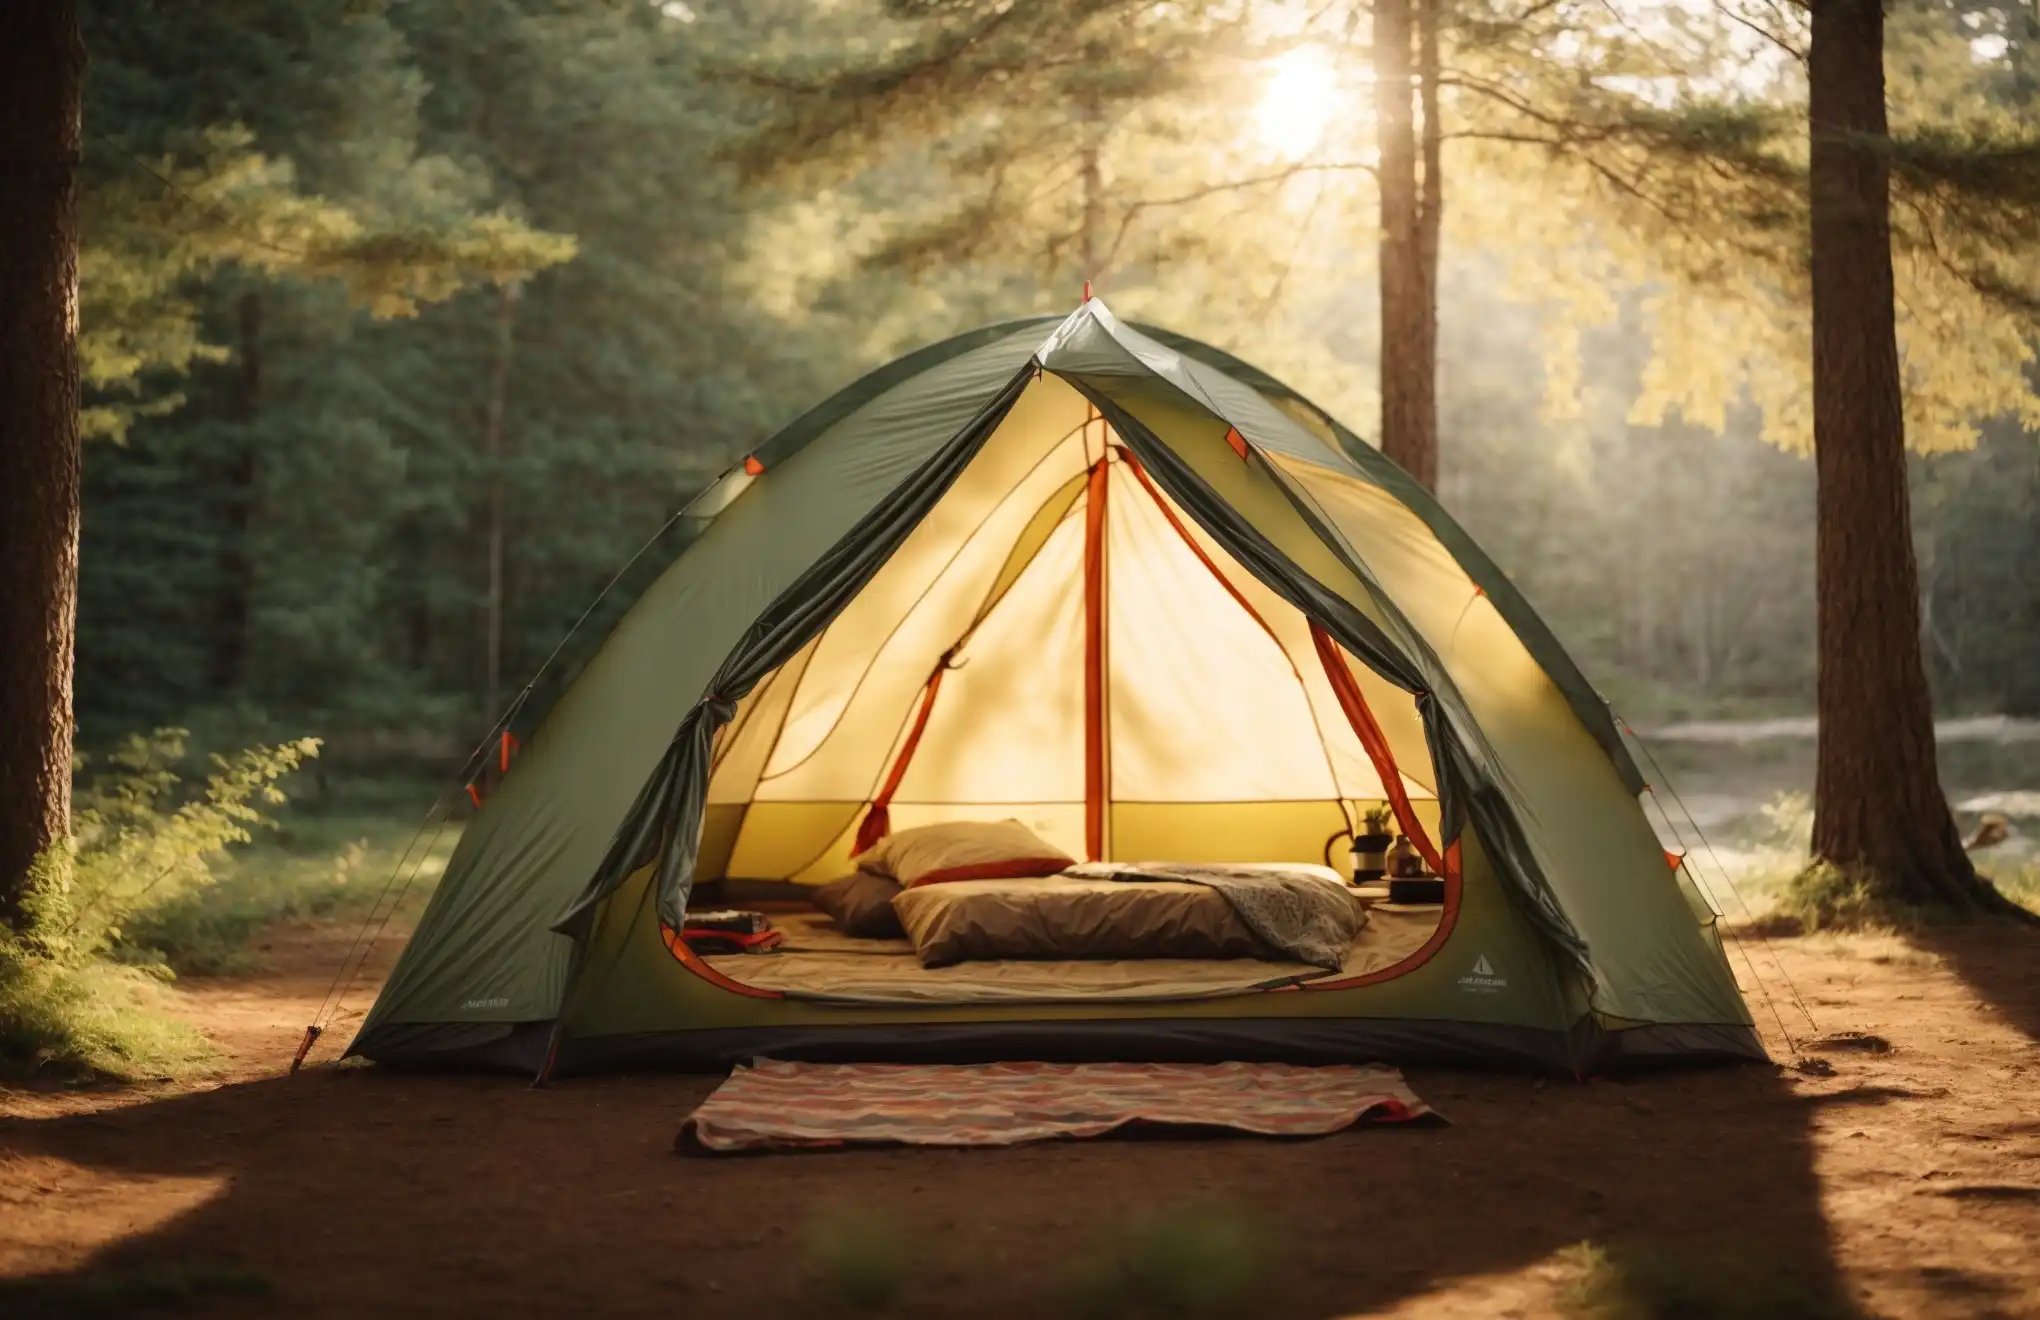 How to Insulate Tent for Summer: Beat the Heat